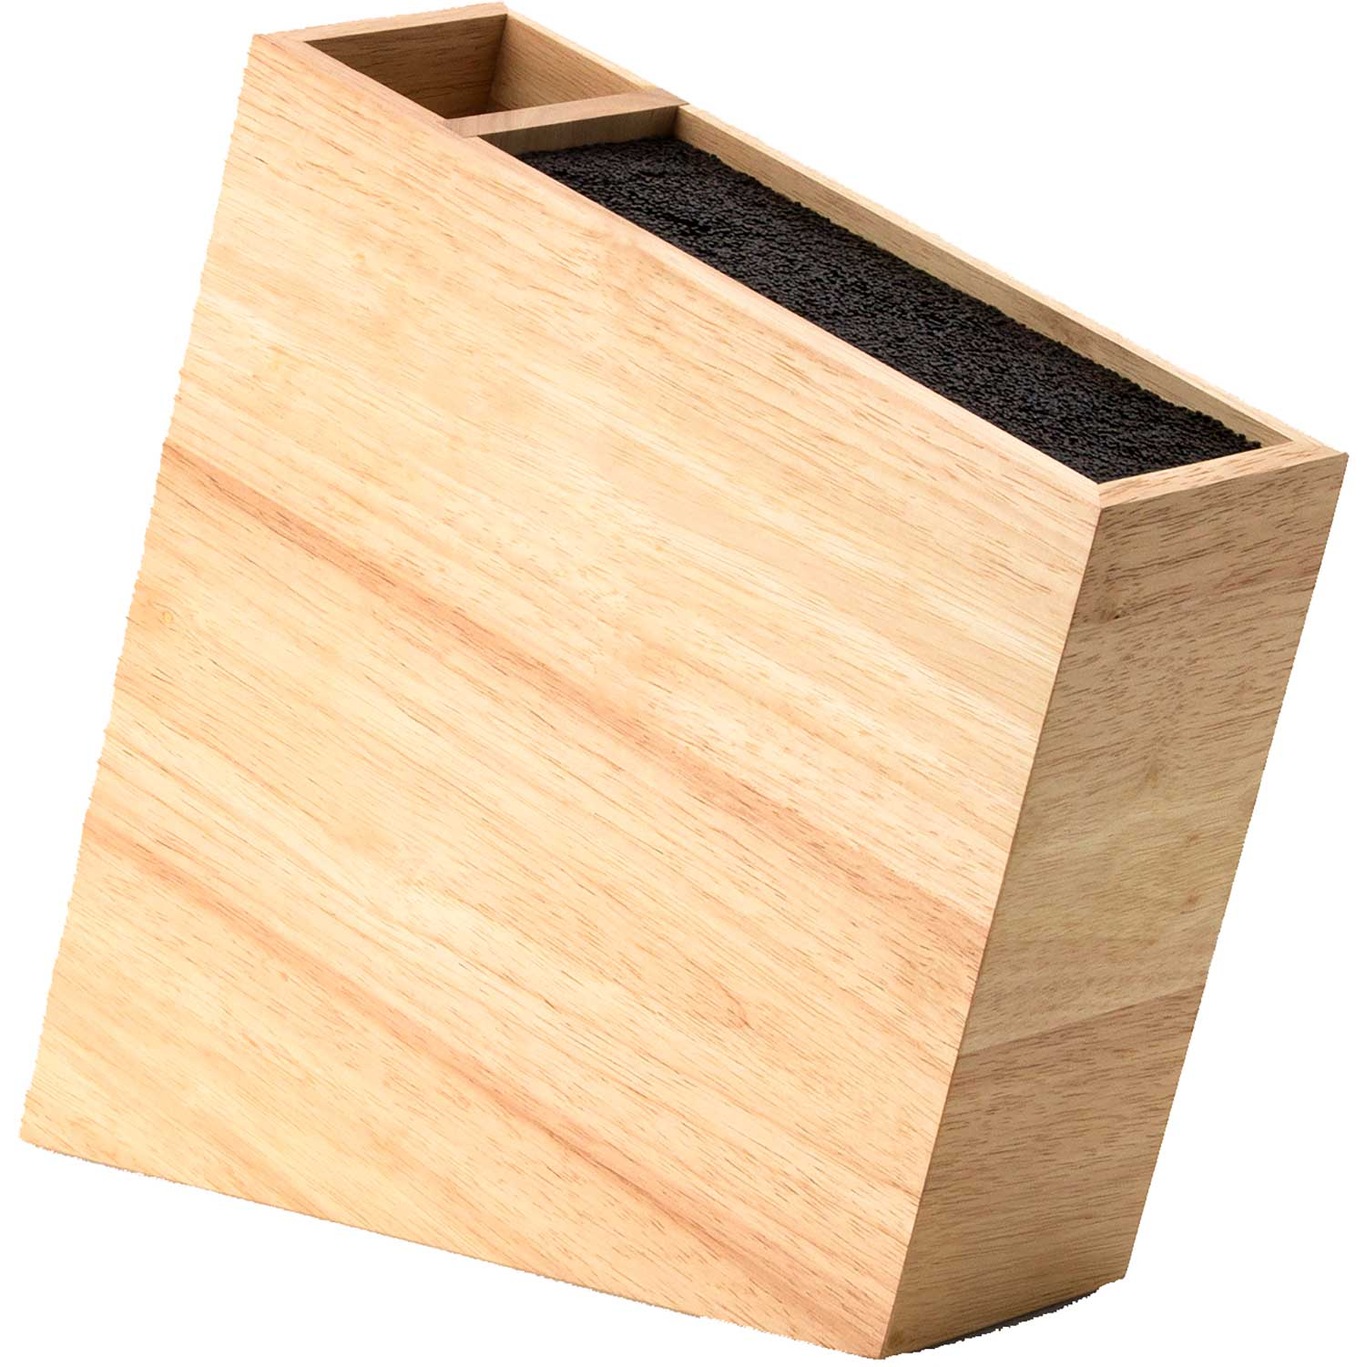 Knife Block With Extra Compartment